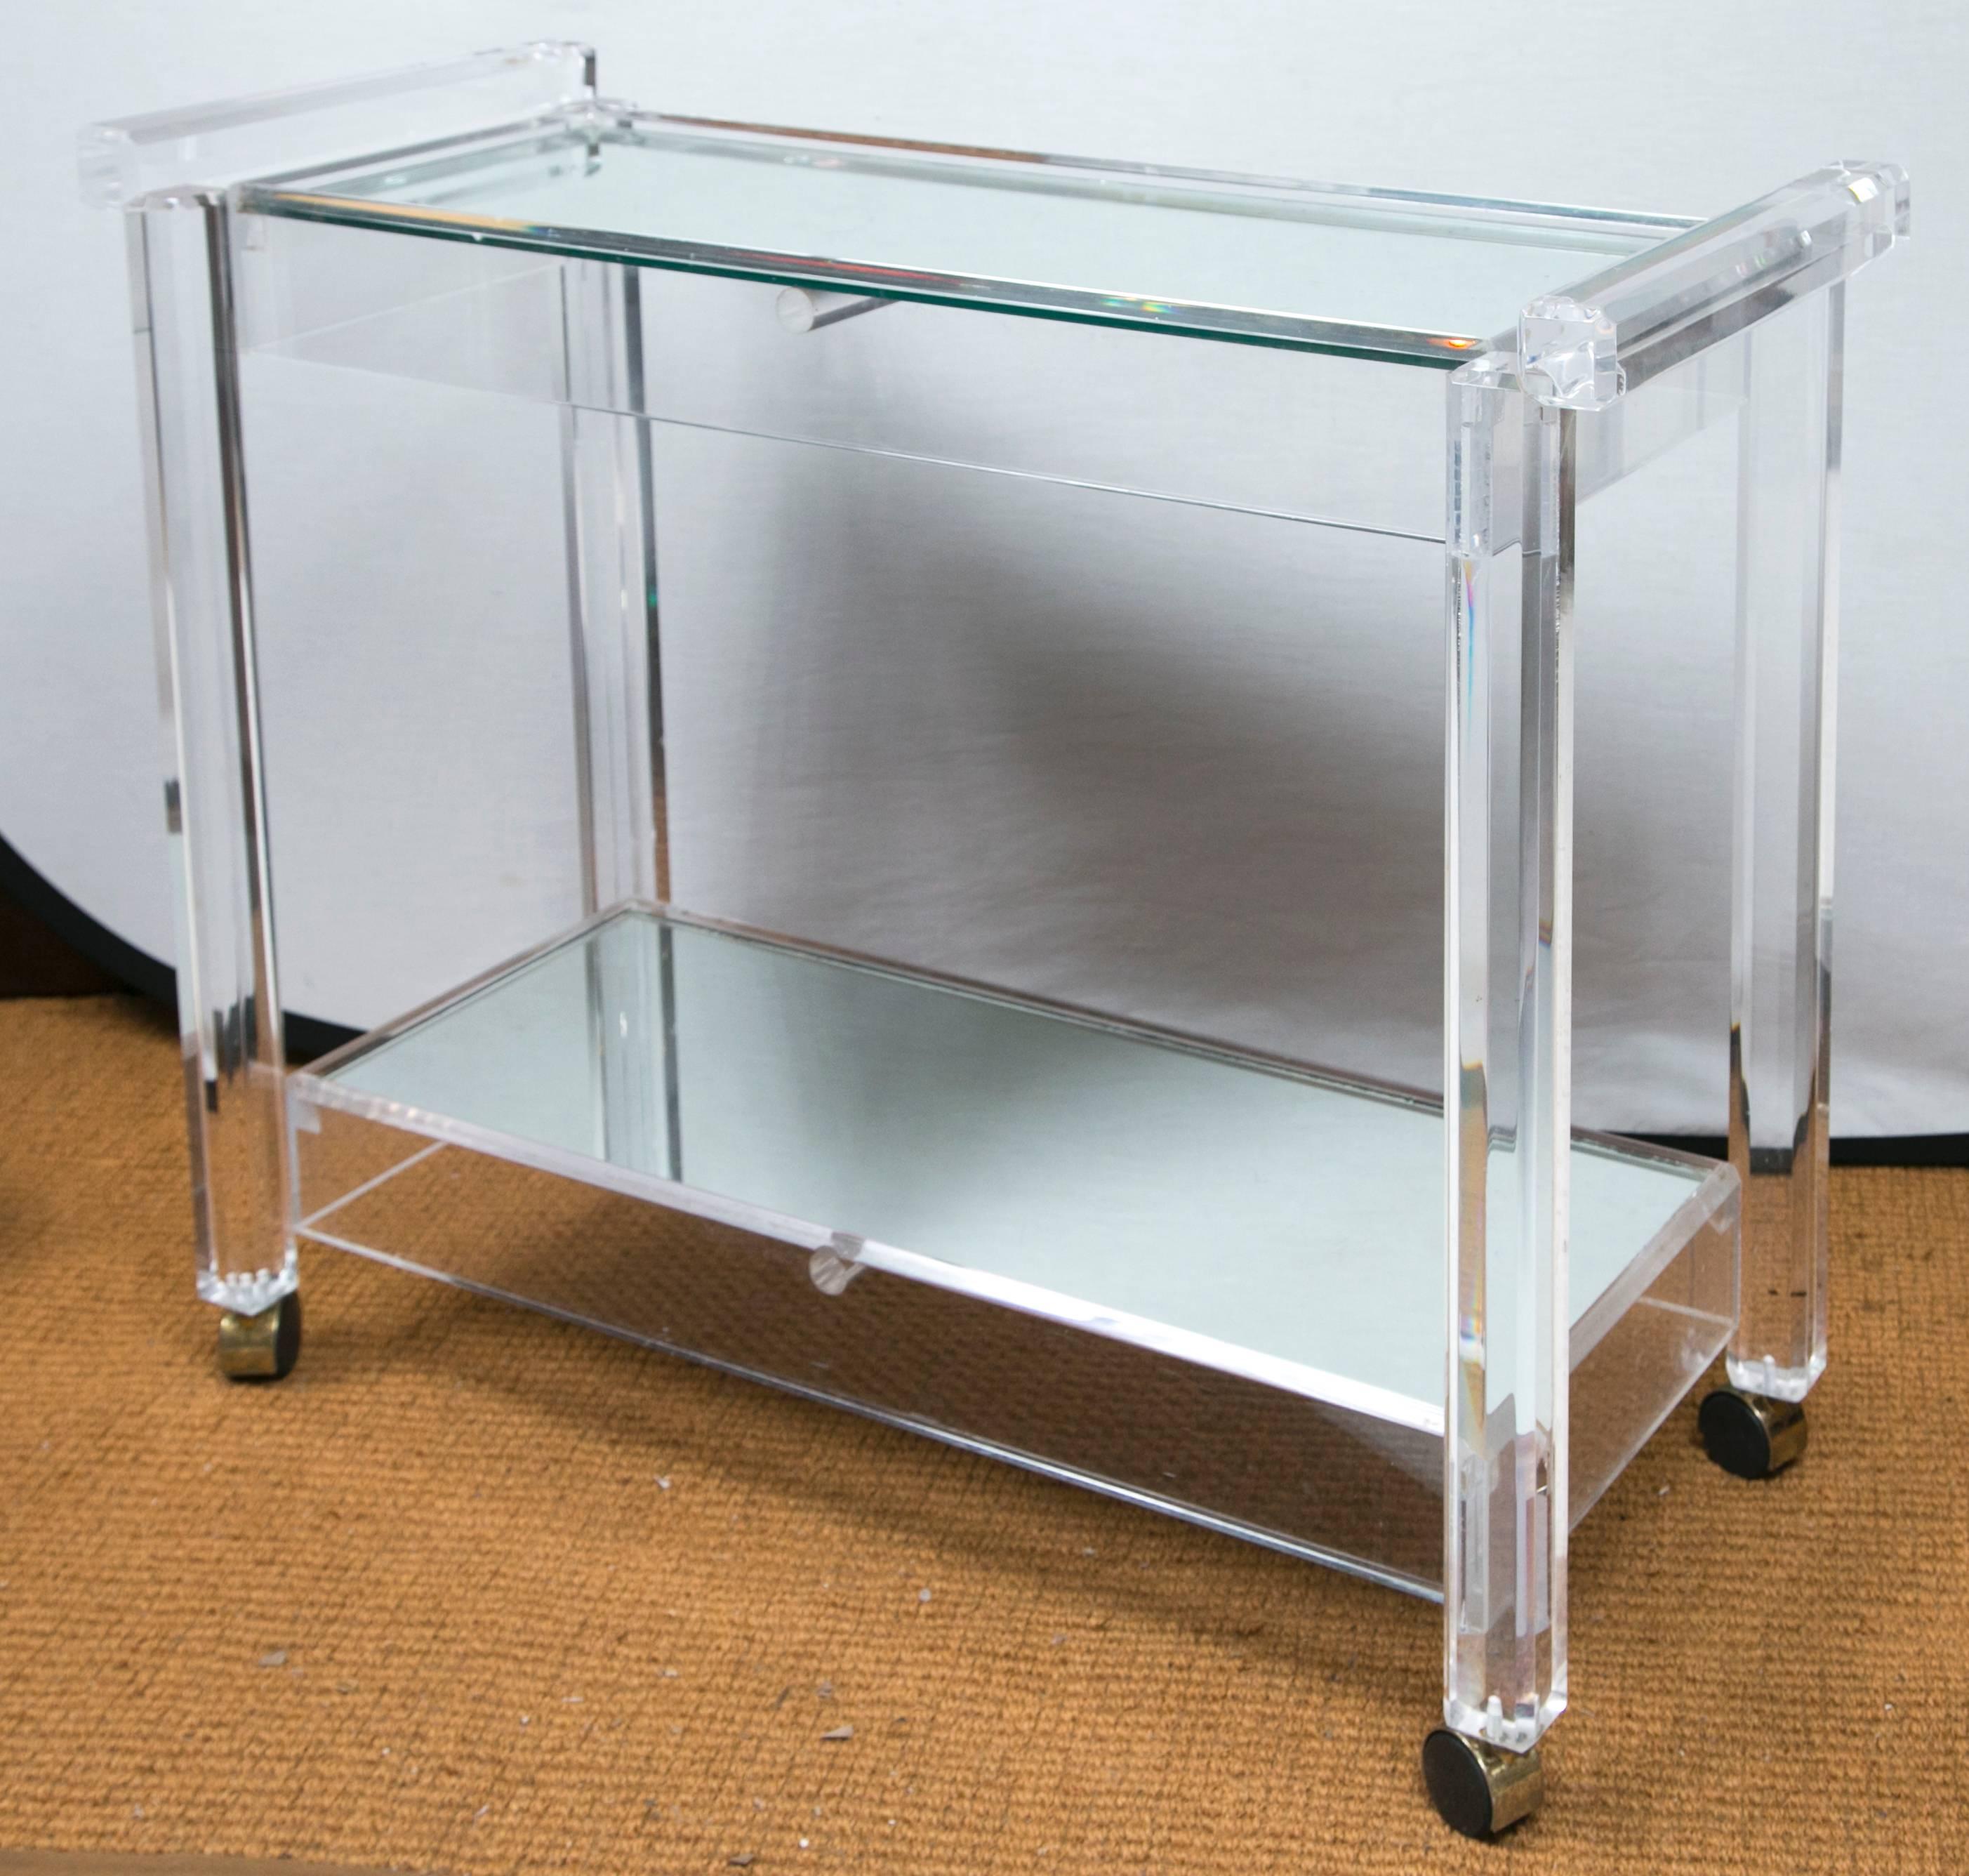 A boldly subtle vintage Lucite bar cart in incredible condition. It has incredible weight and presence but remains transparent due to the use of material. Each tier has inset antiqued mirror that expands the piece visually. It's a wonderful piece